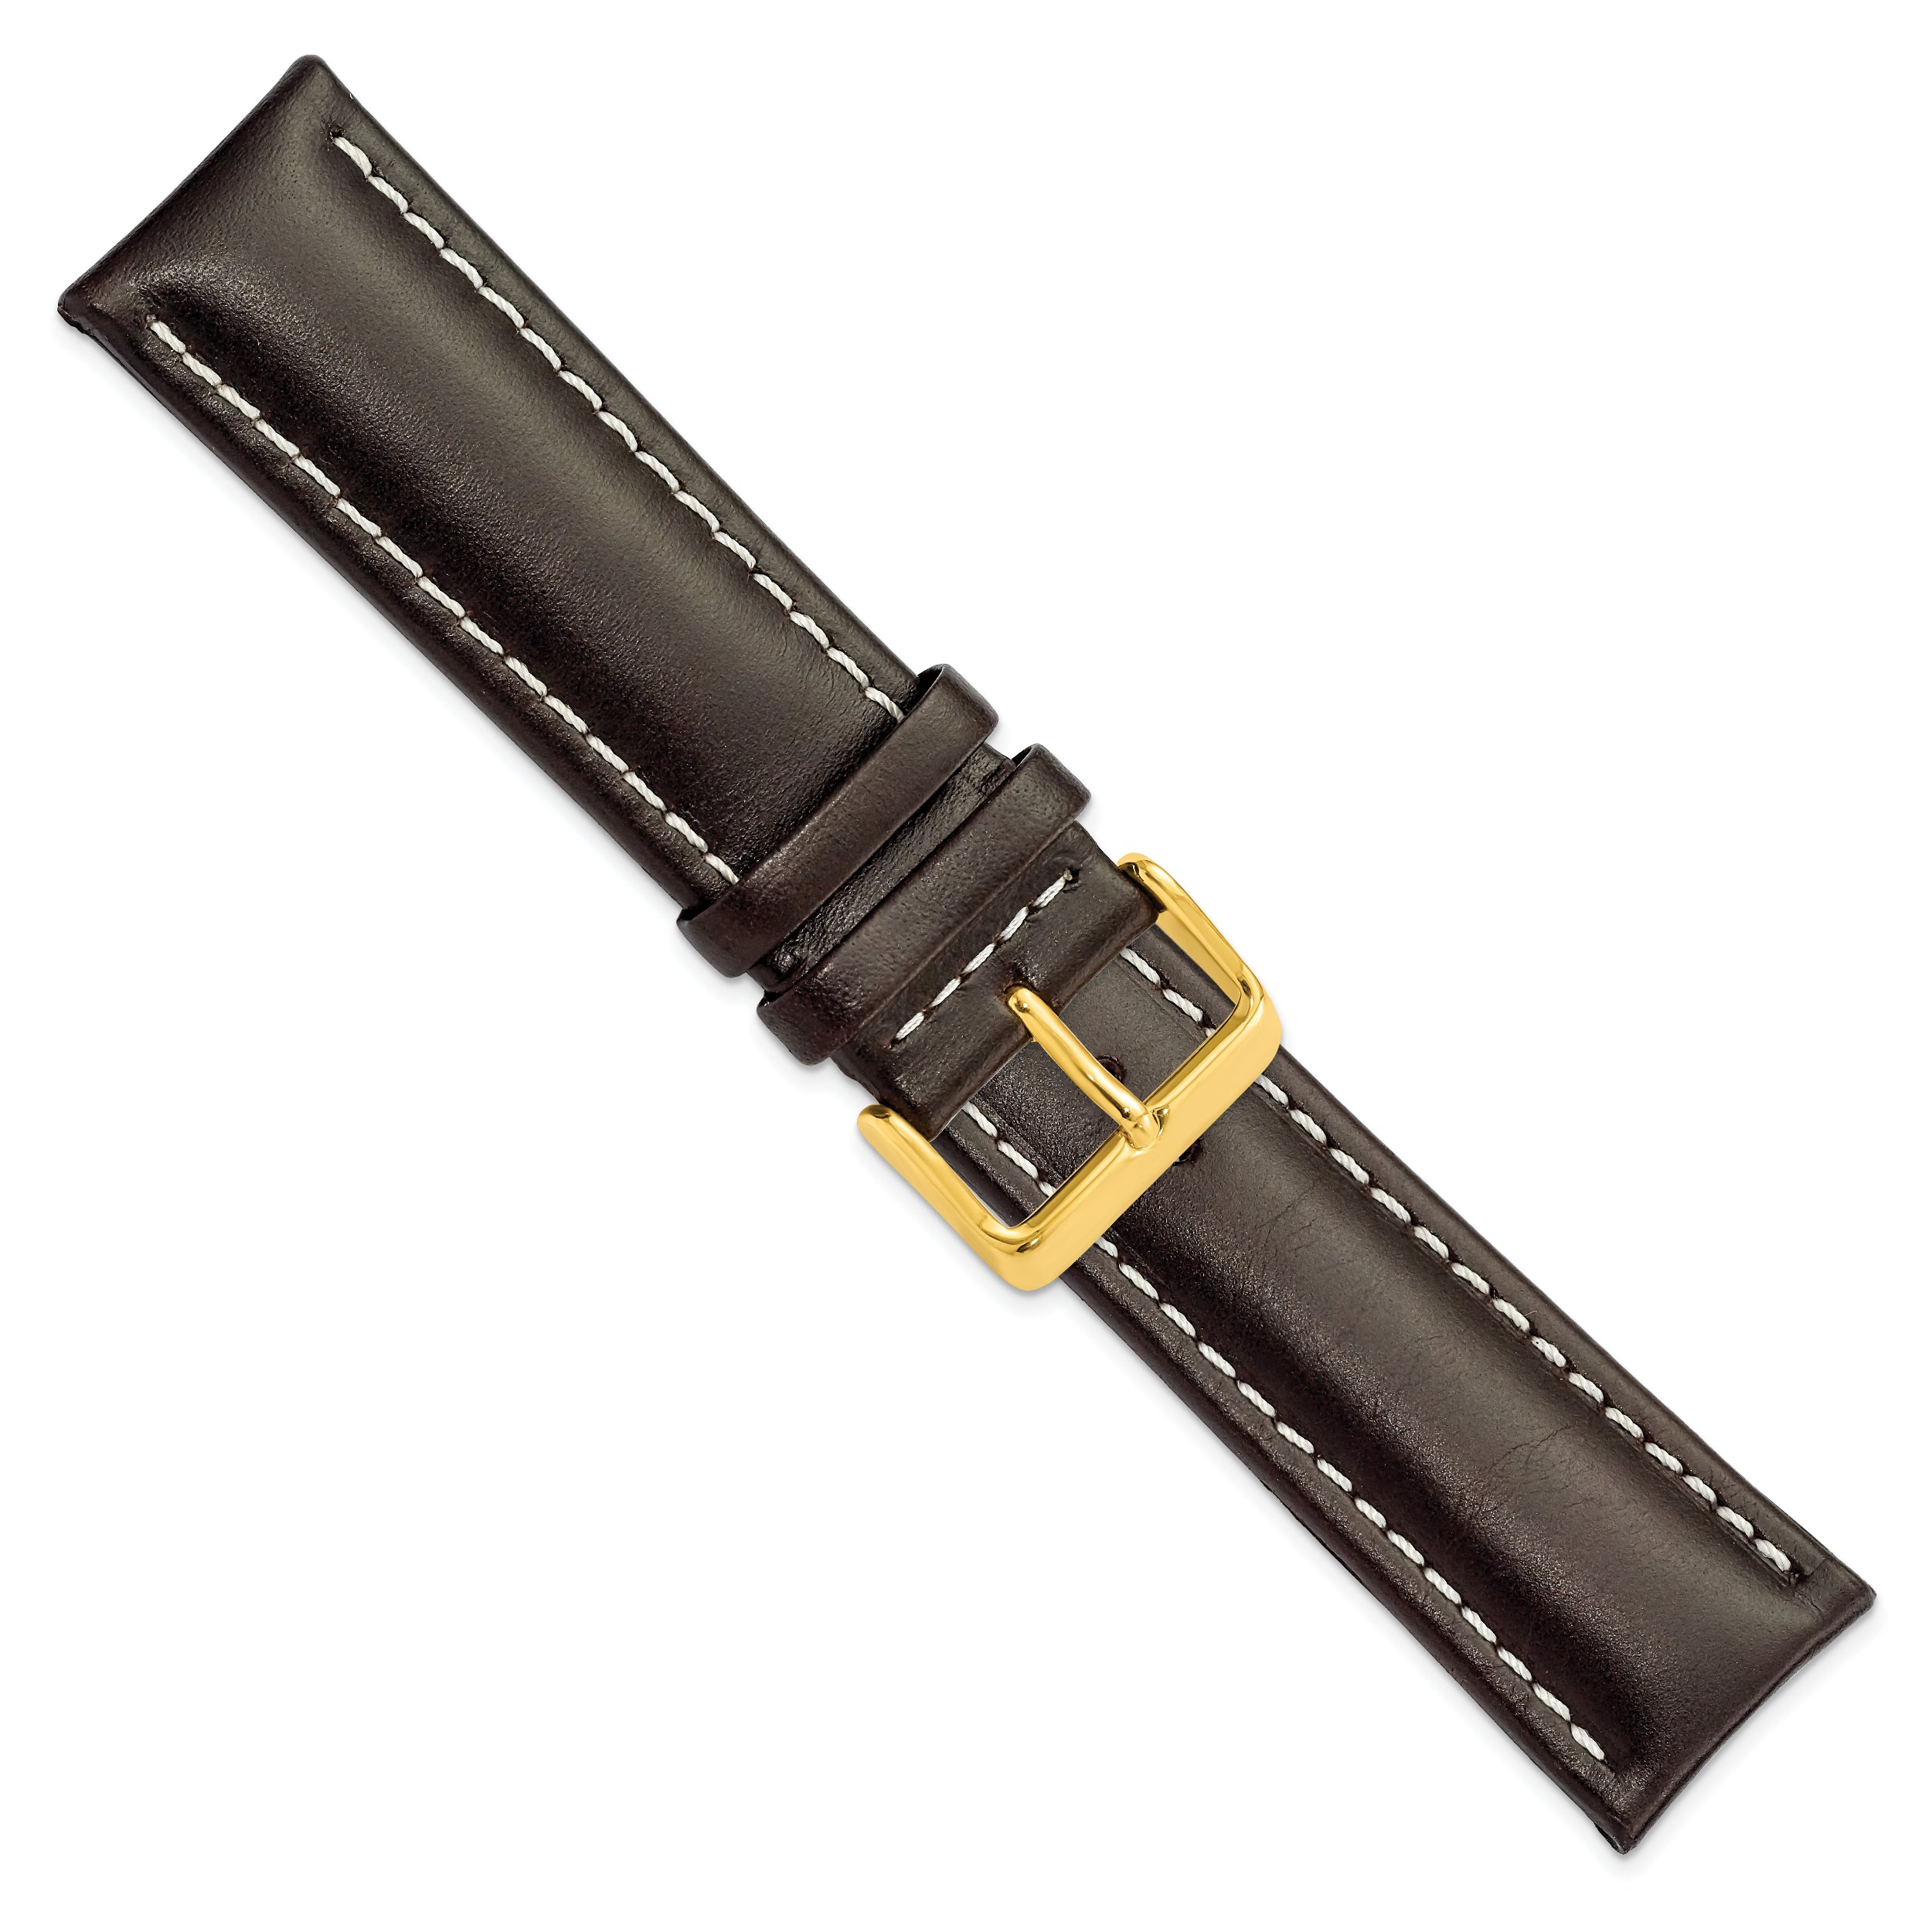 14mm Dark Brown Oil-tanned Leather with White Stitching and Gold-tone Buckle 6.75 inch Watch Band